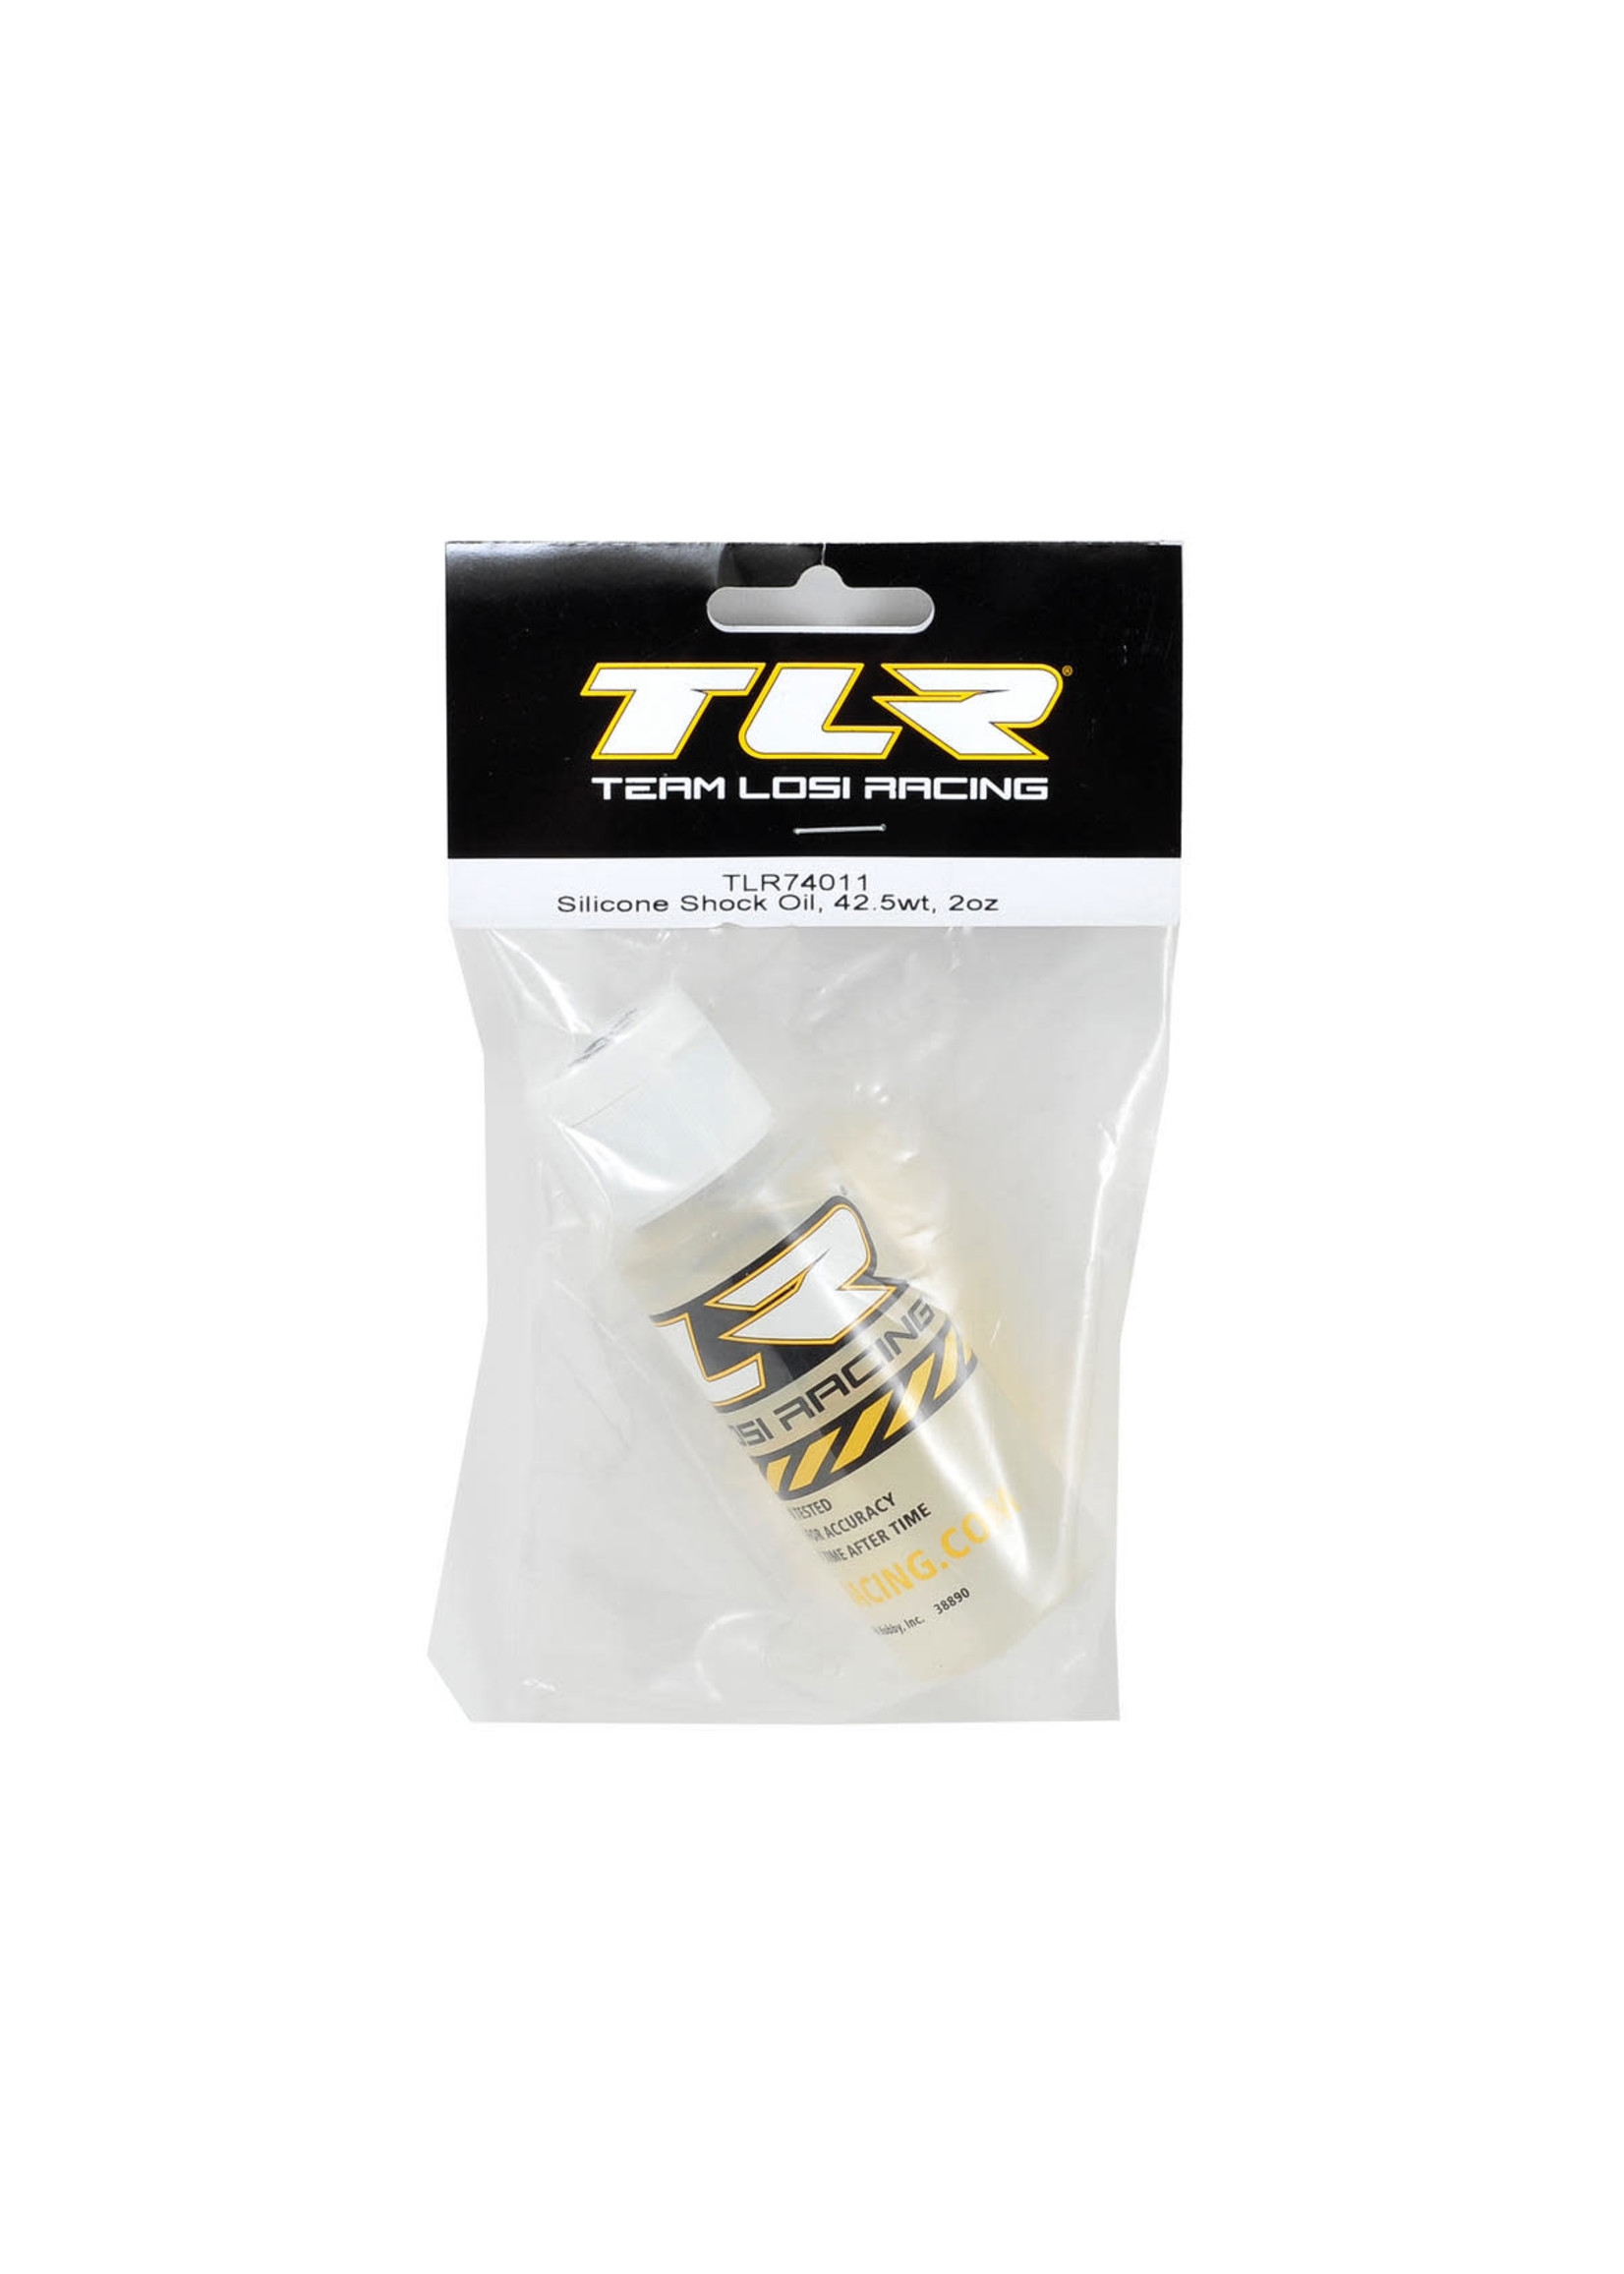 TLR TLR74011 Team Losi Racing Silicone Shock Oil (2oz) (42.5wt)